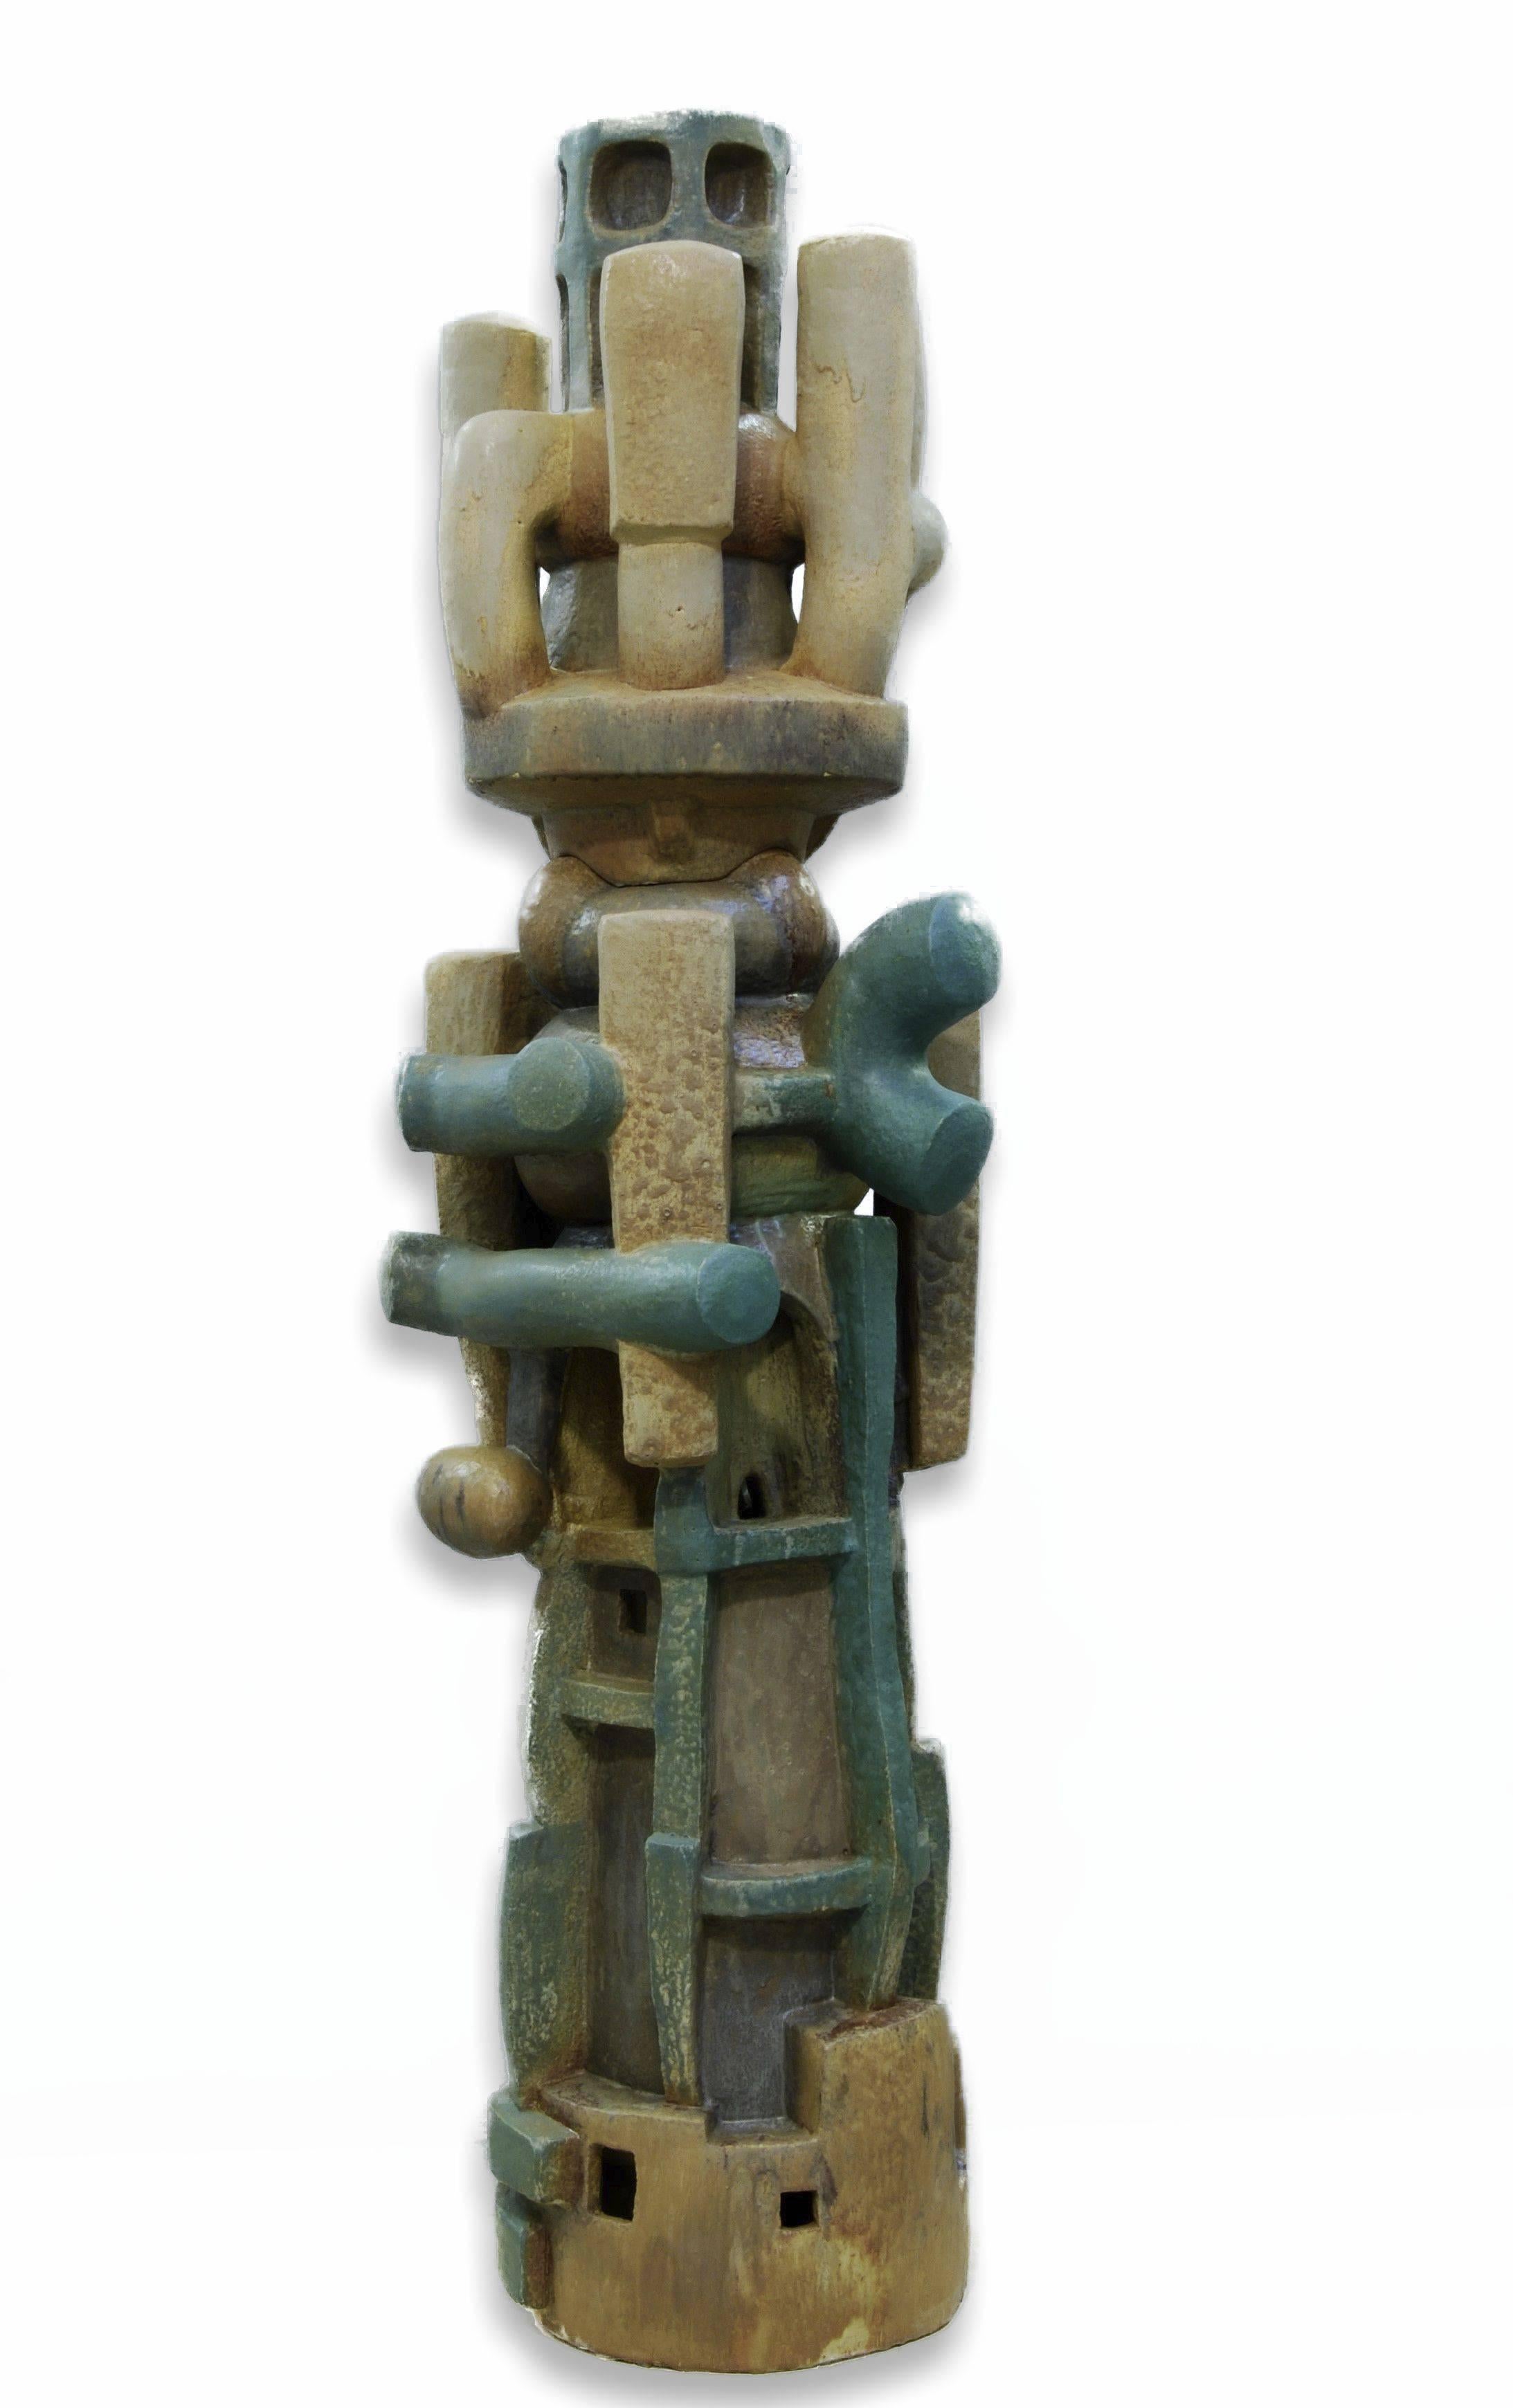 Tower King (from the Recursion Collision Series) - Sculpture by John Balistreri